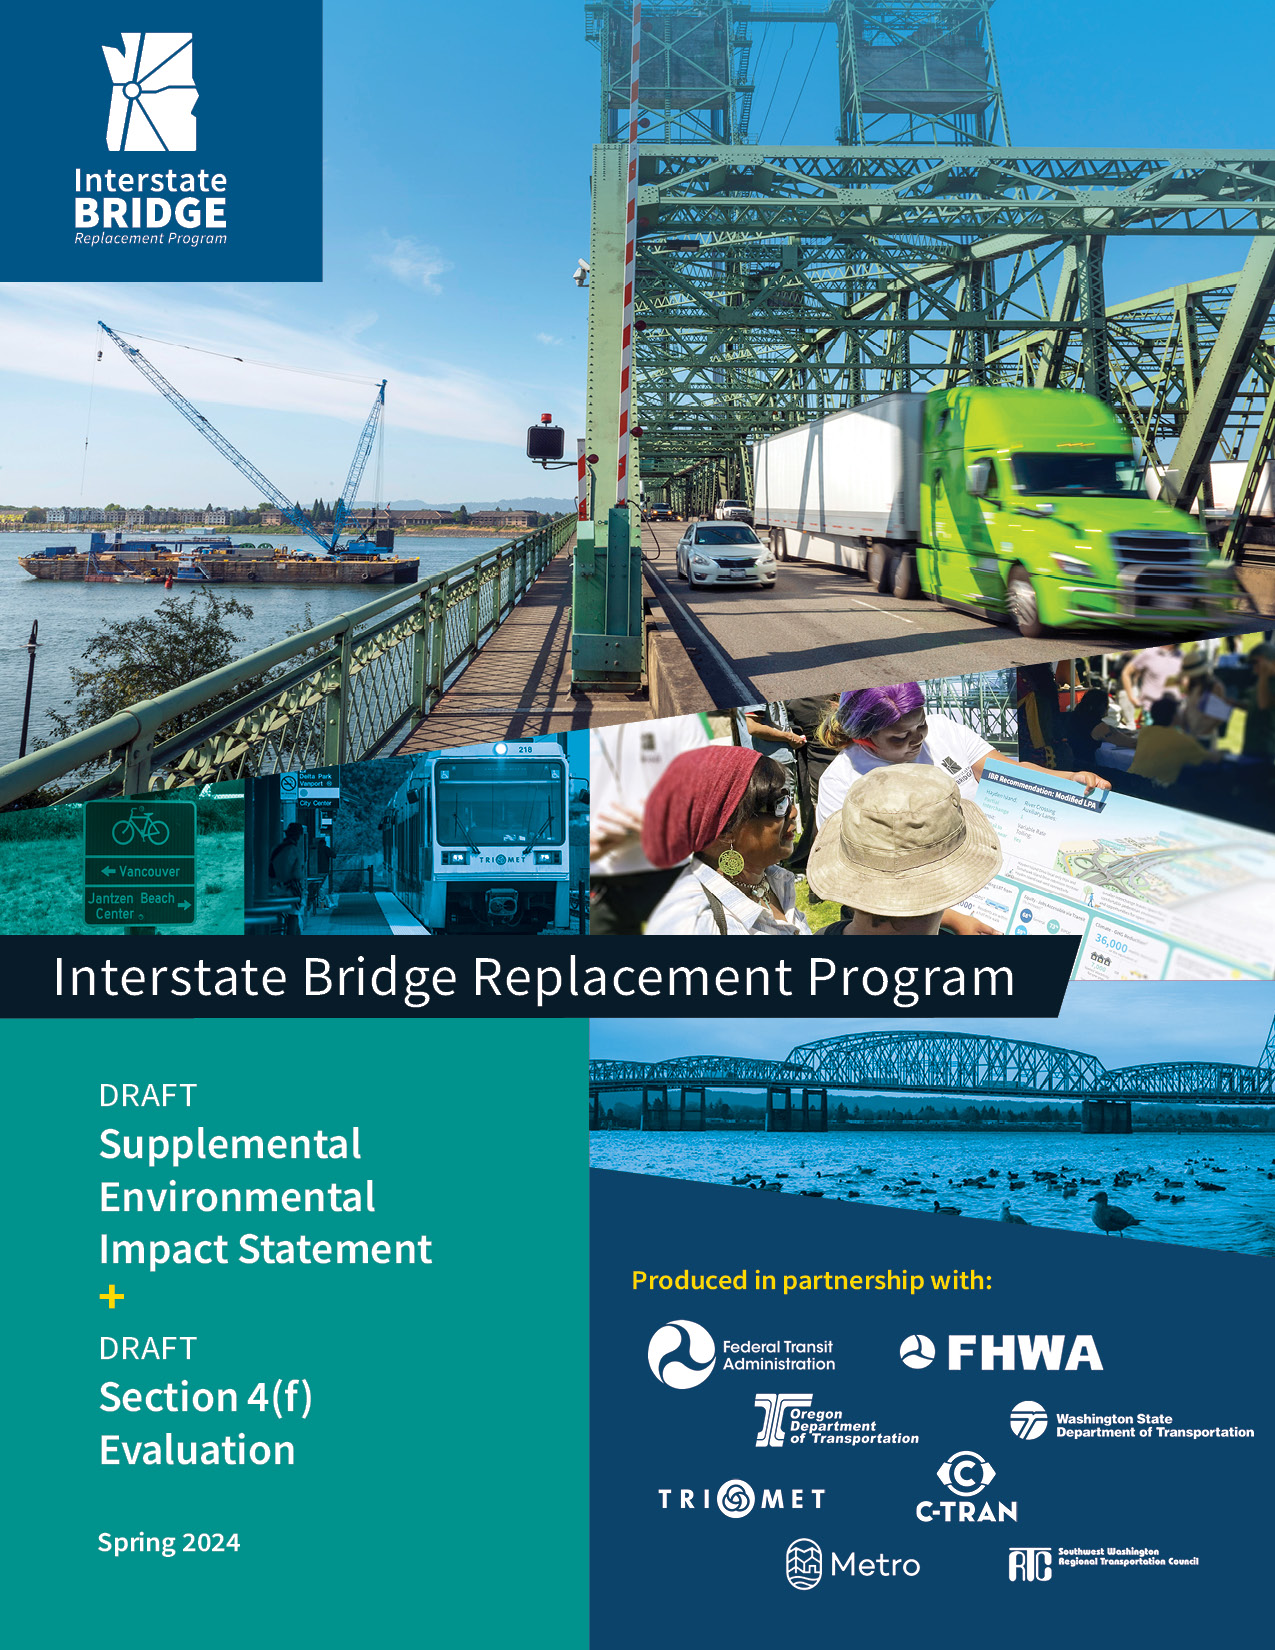 Cover of the SEIS that shows an image of the bridge, community engagement, and the lightrail